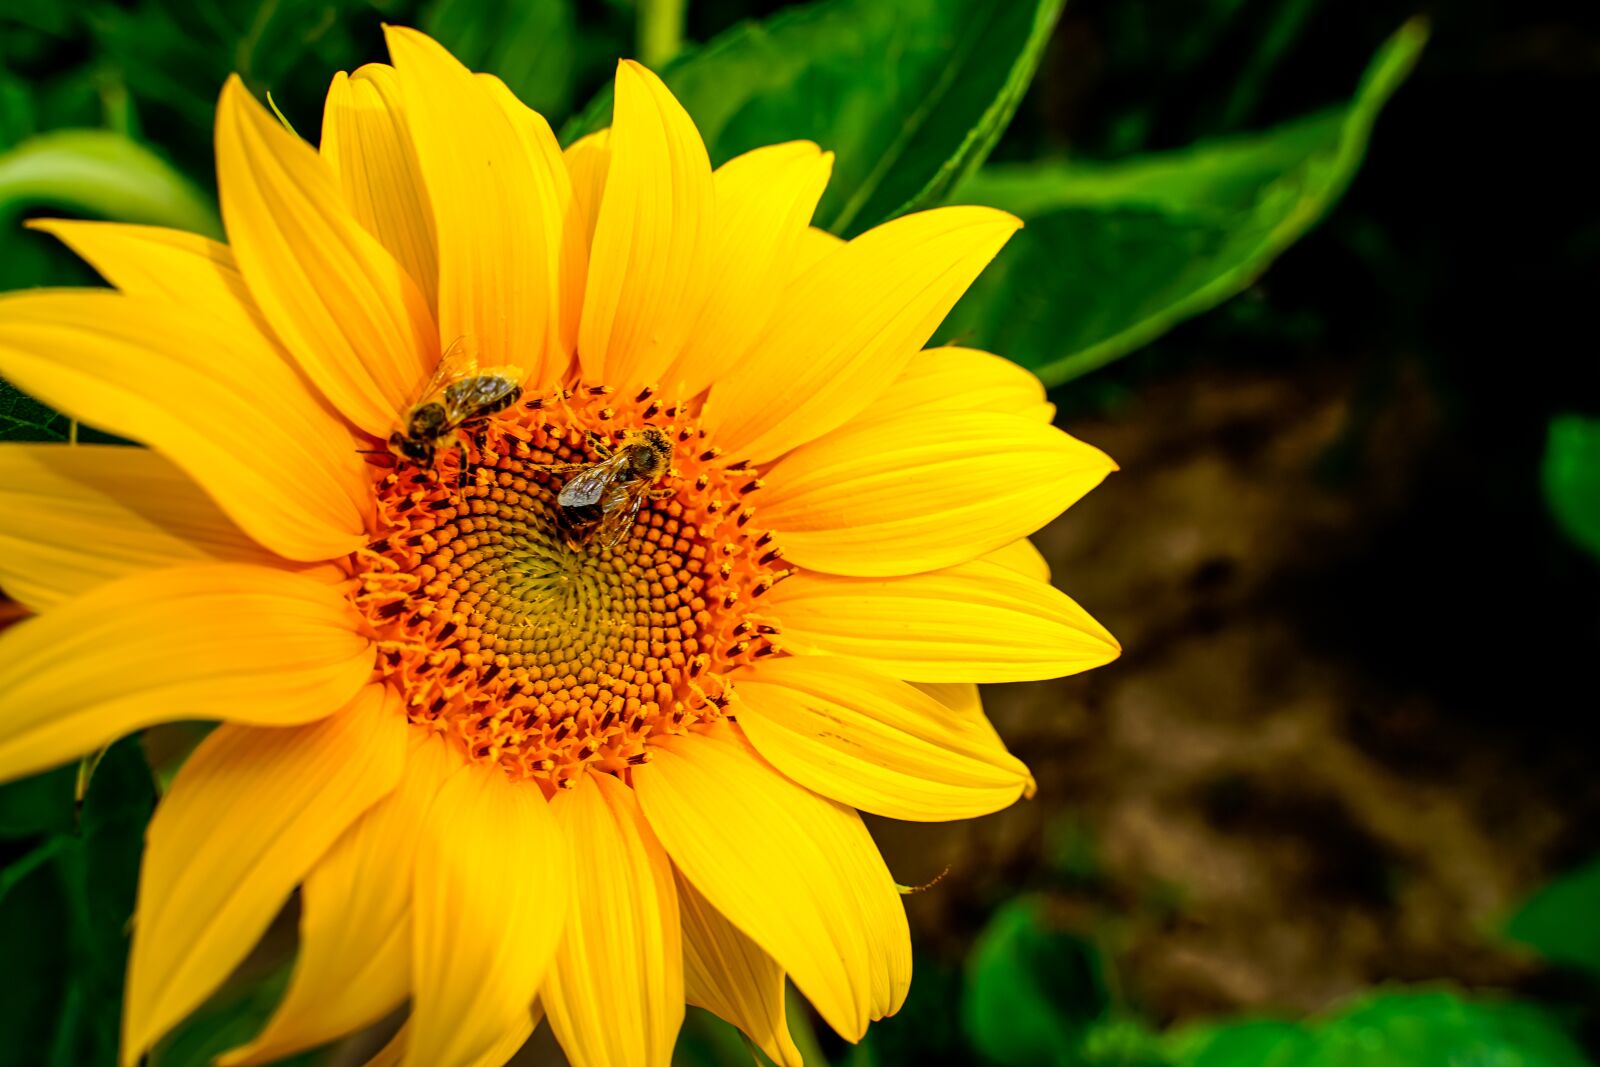 Sony a7 II sample photo. Sunflower, bees, summer photography